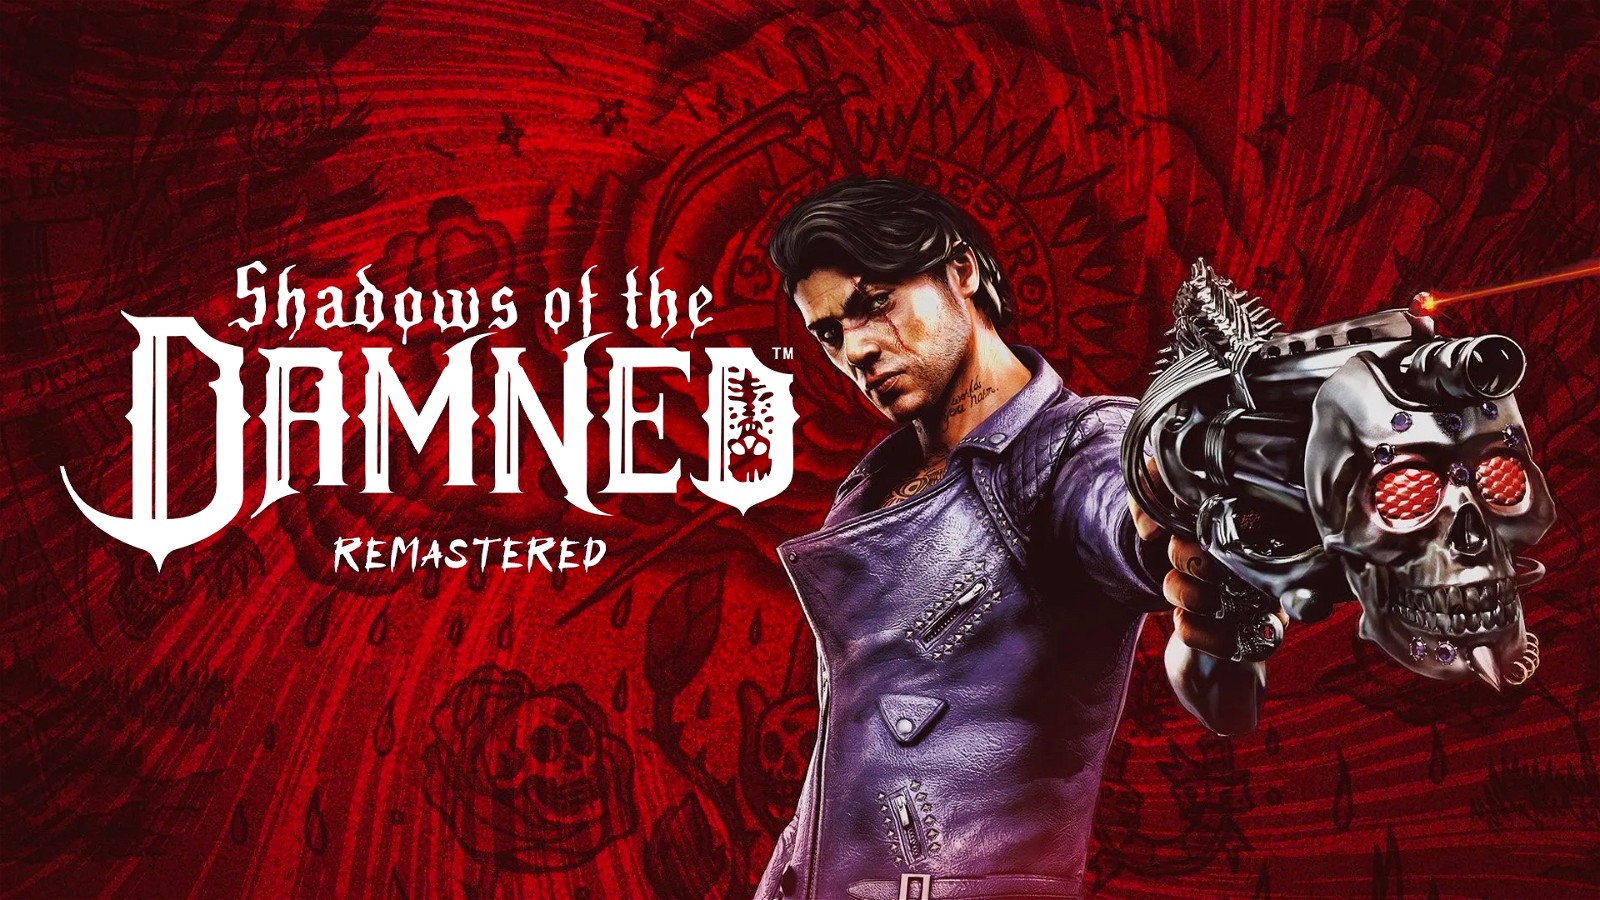 Suda51 Classic, Shadows of the Damned, is Getting a Remaster